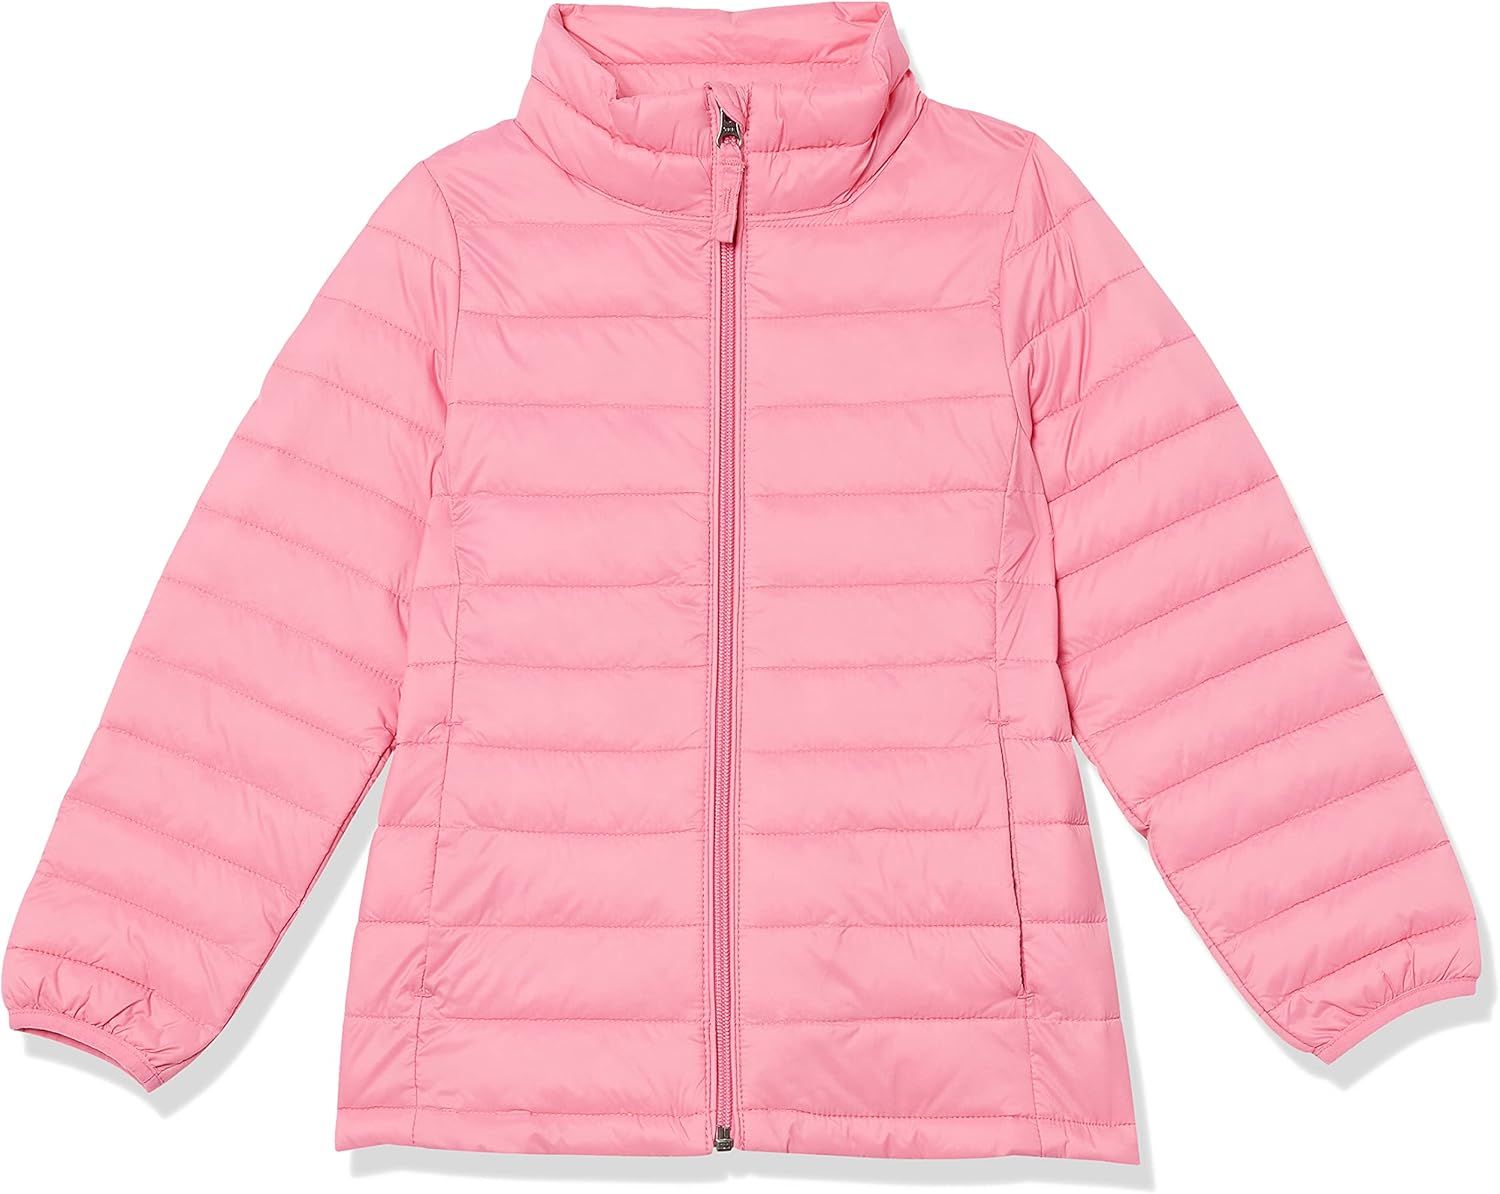 Amazon Essentials Girls and Toddlers' Light-Weight Water-Resistant Packable Mock Puffer Jackets | Amazon (US)